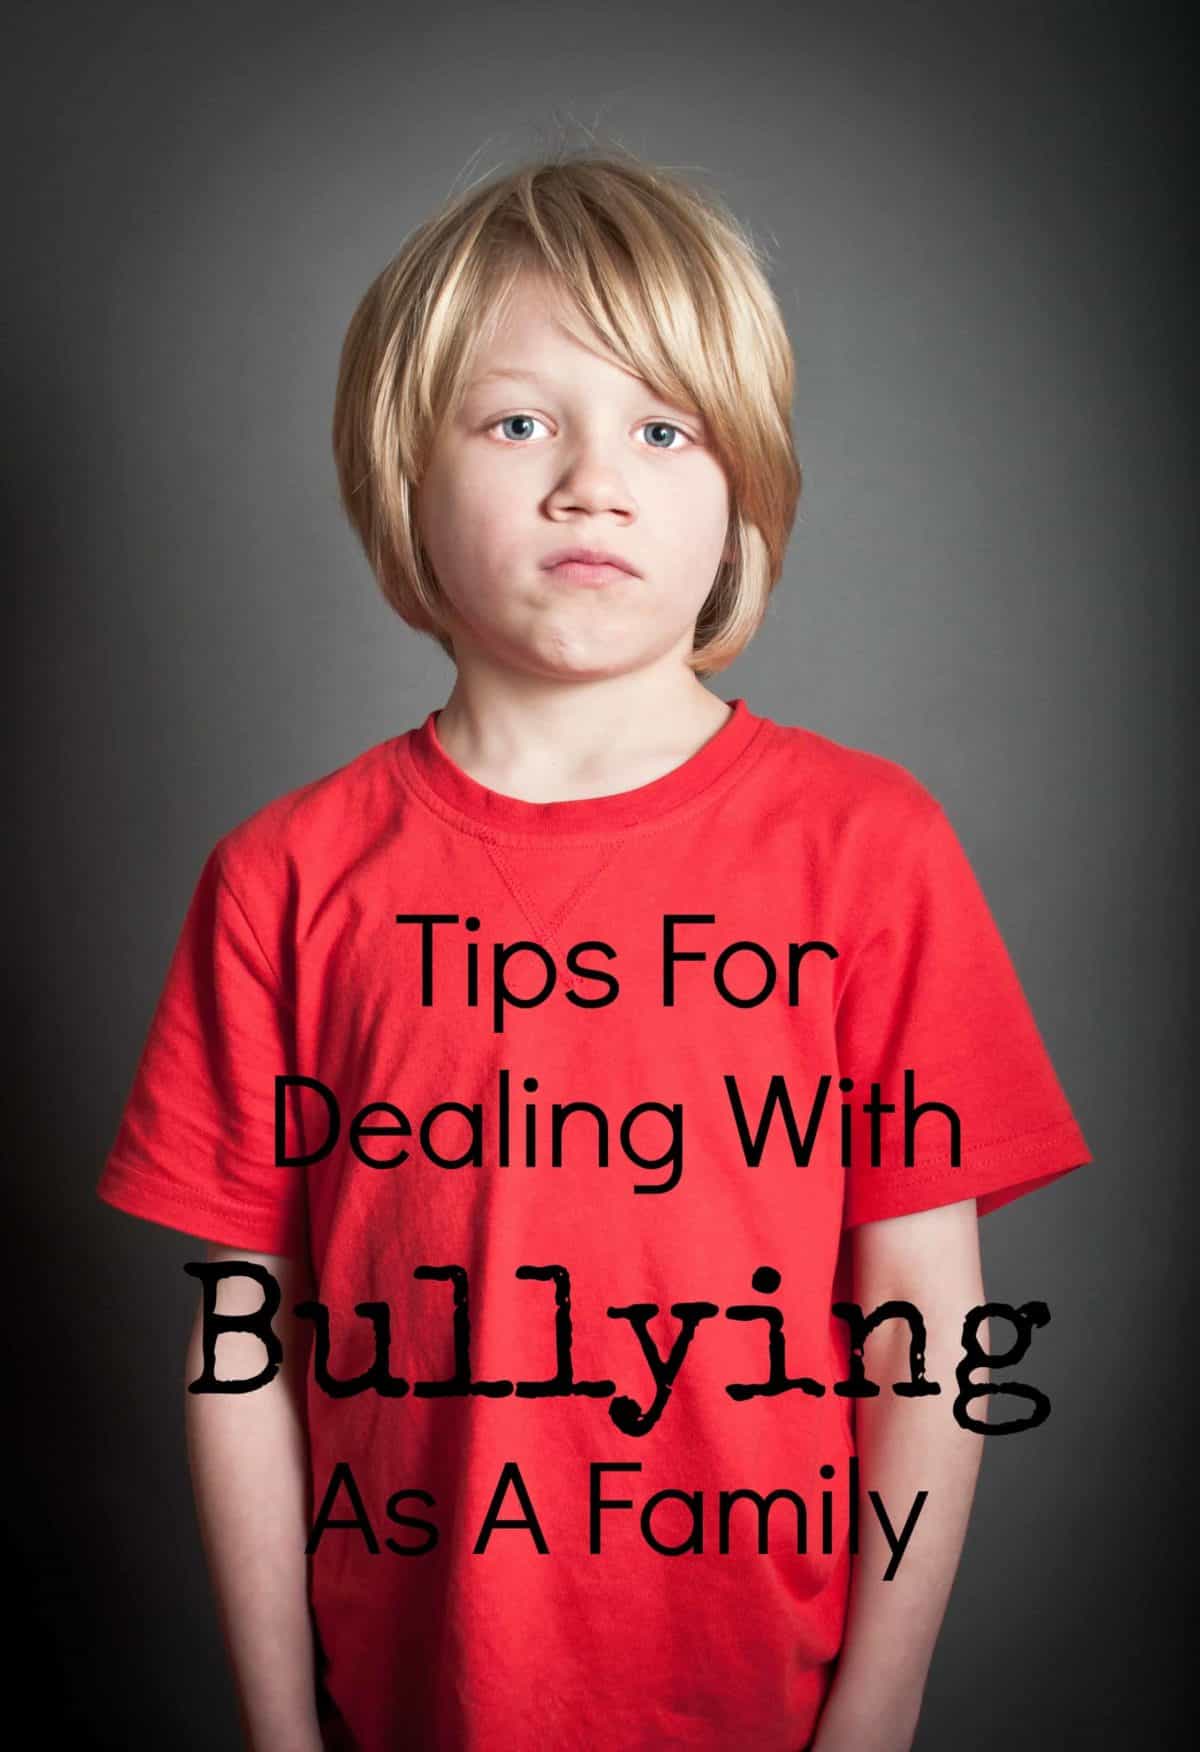 When your child is bullied, he needs everyone to rally around to get him through this time. Check out our tips for dealing with bullying as a family.